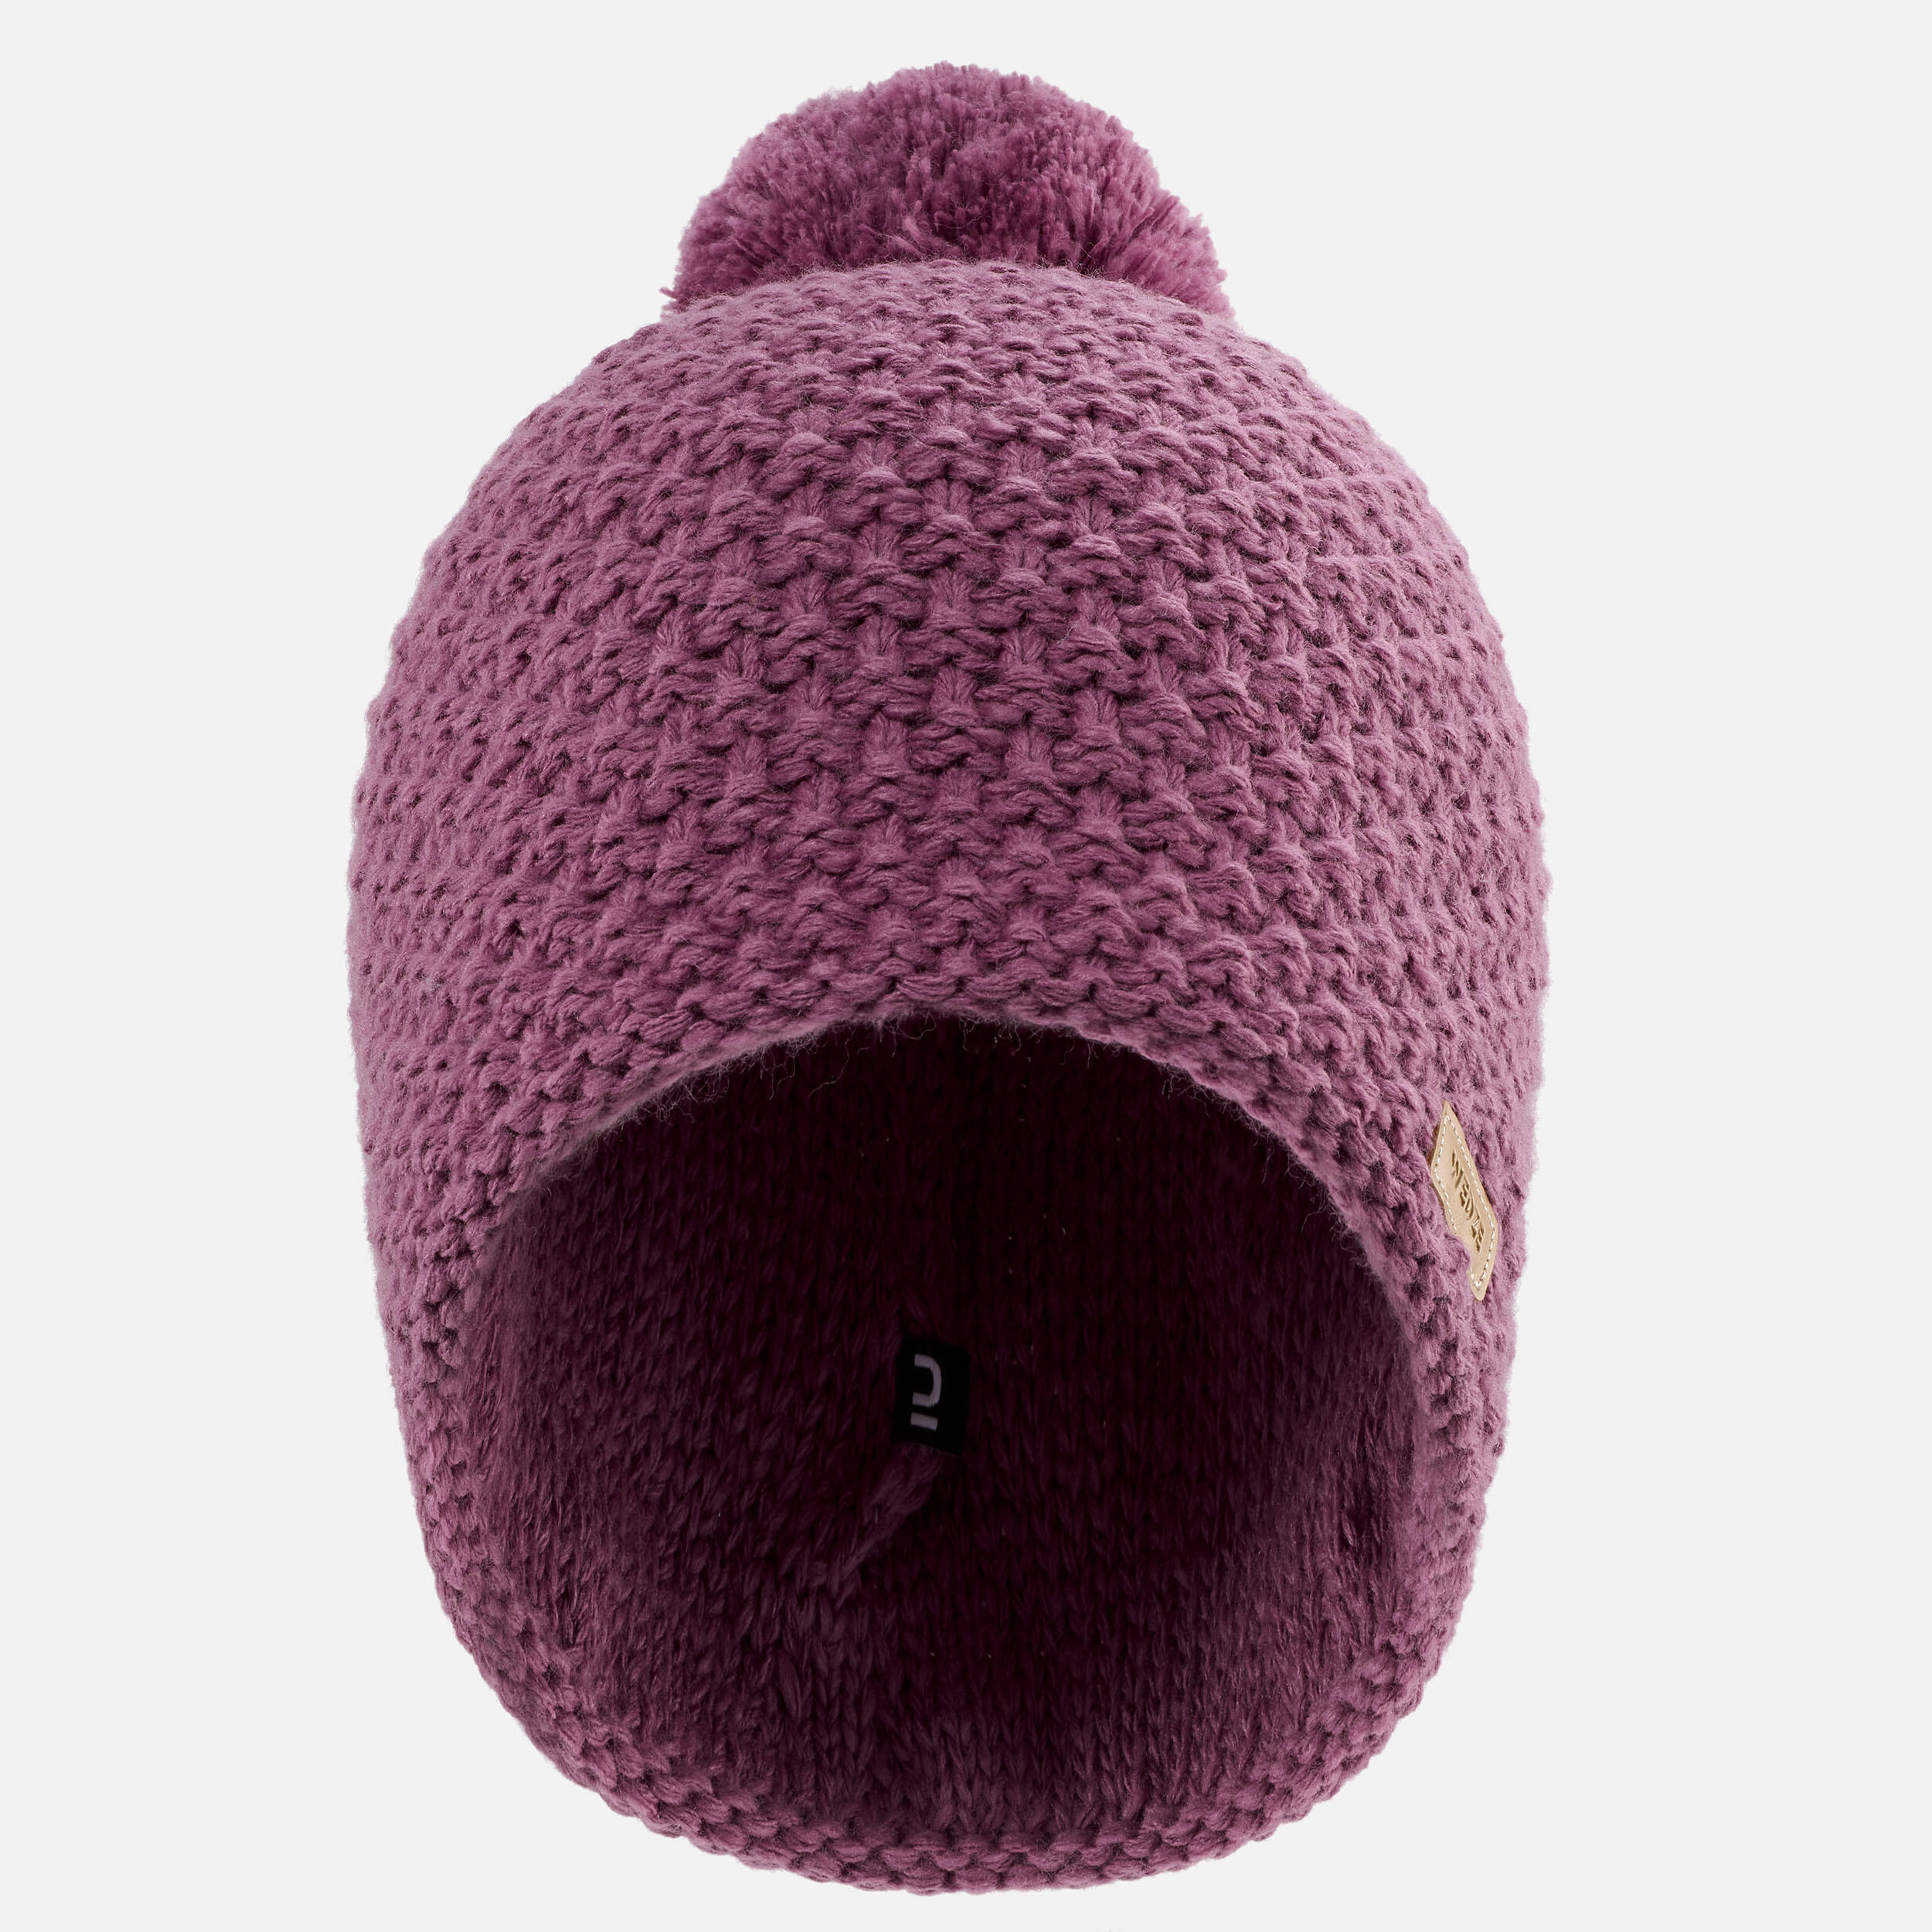 ADULT SKI HAT MADE IN FRANCE - TIMELESS - PURPLE 4/8